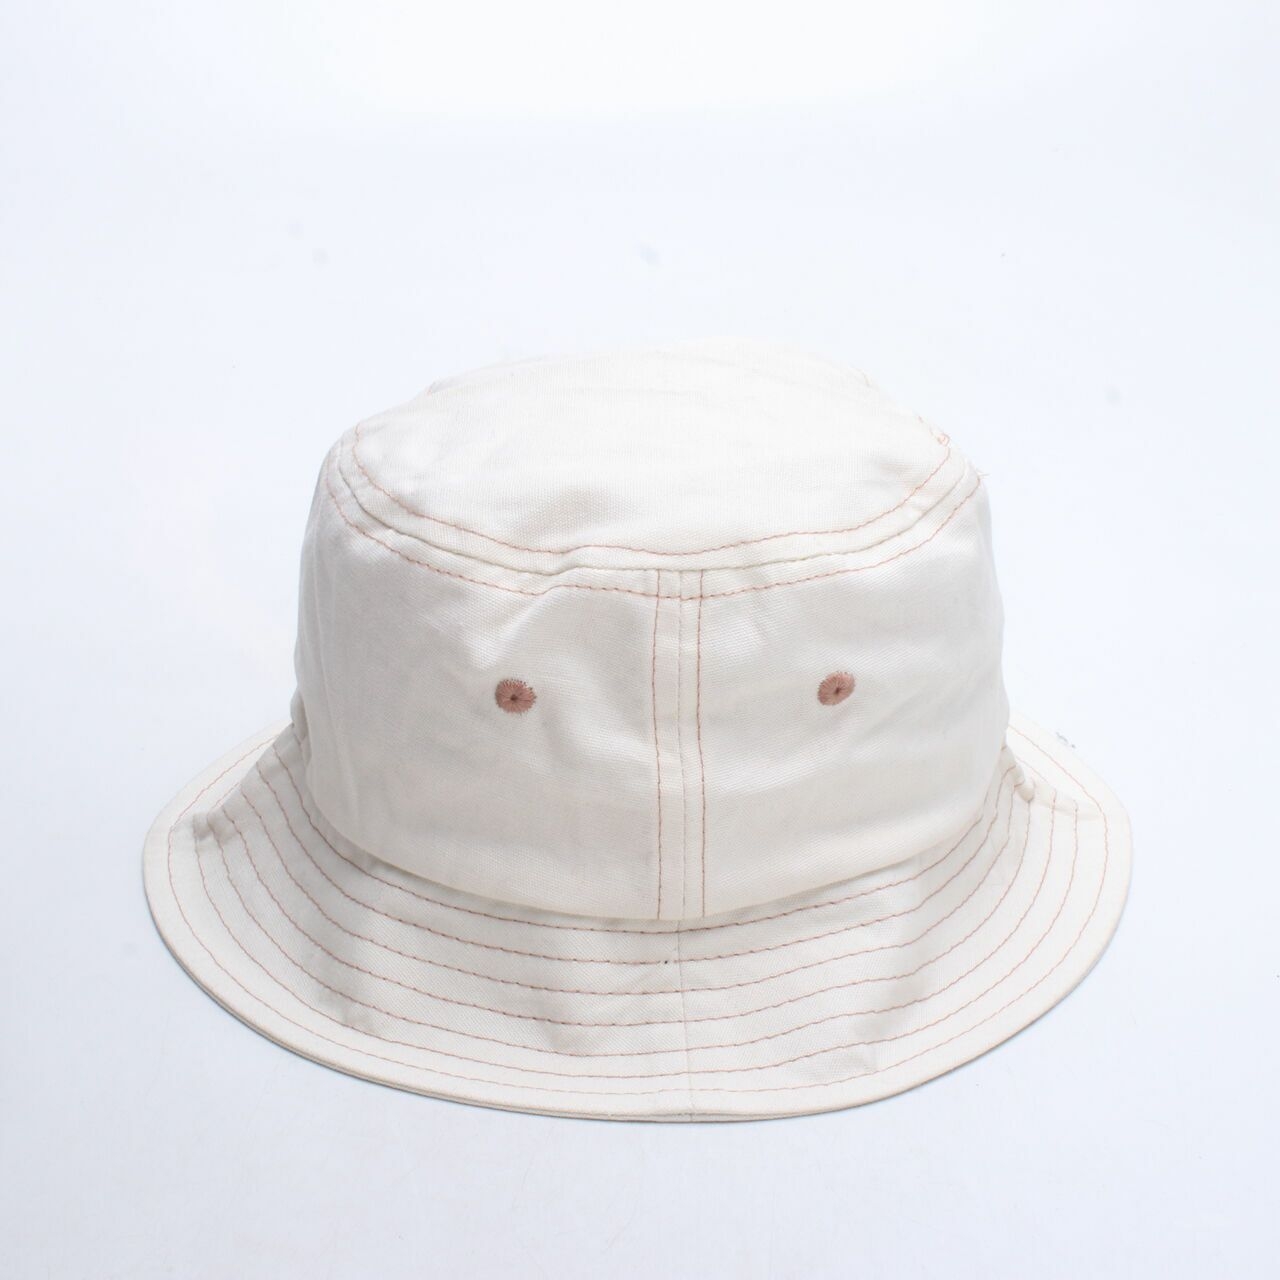 Urban Outfitters Cream Bucket Hats